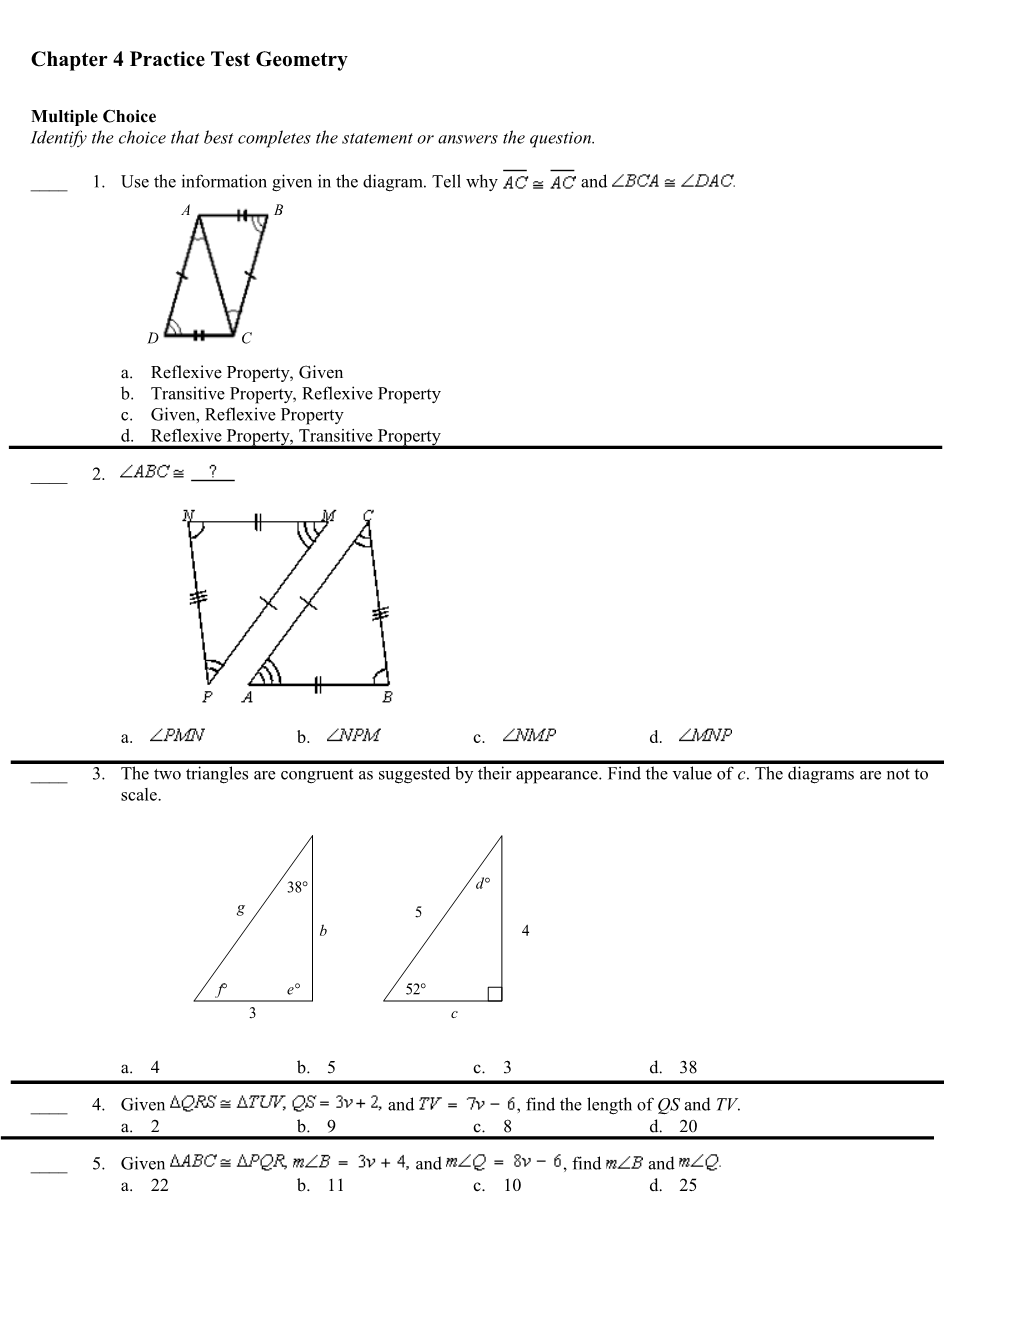 Chapter 4 Practice Test Geometry